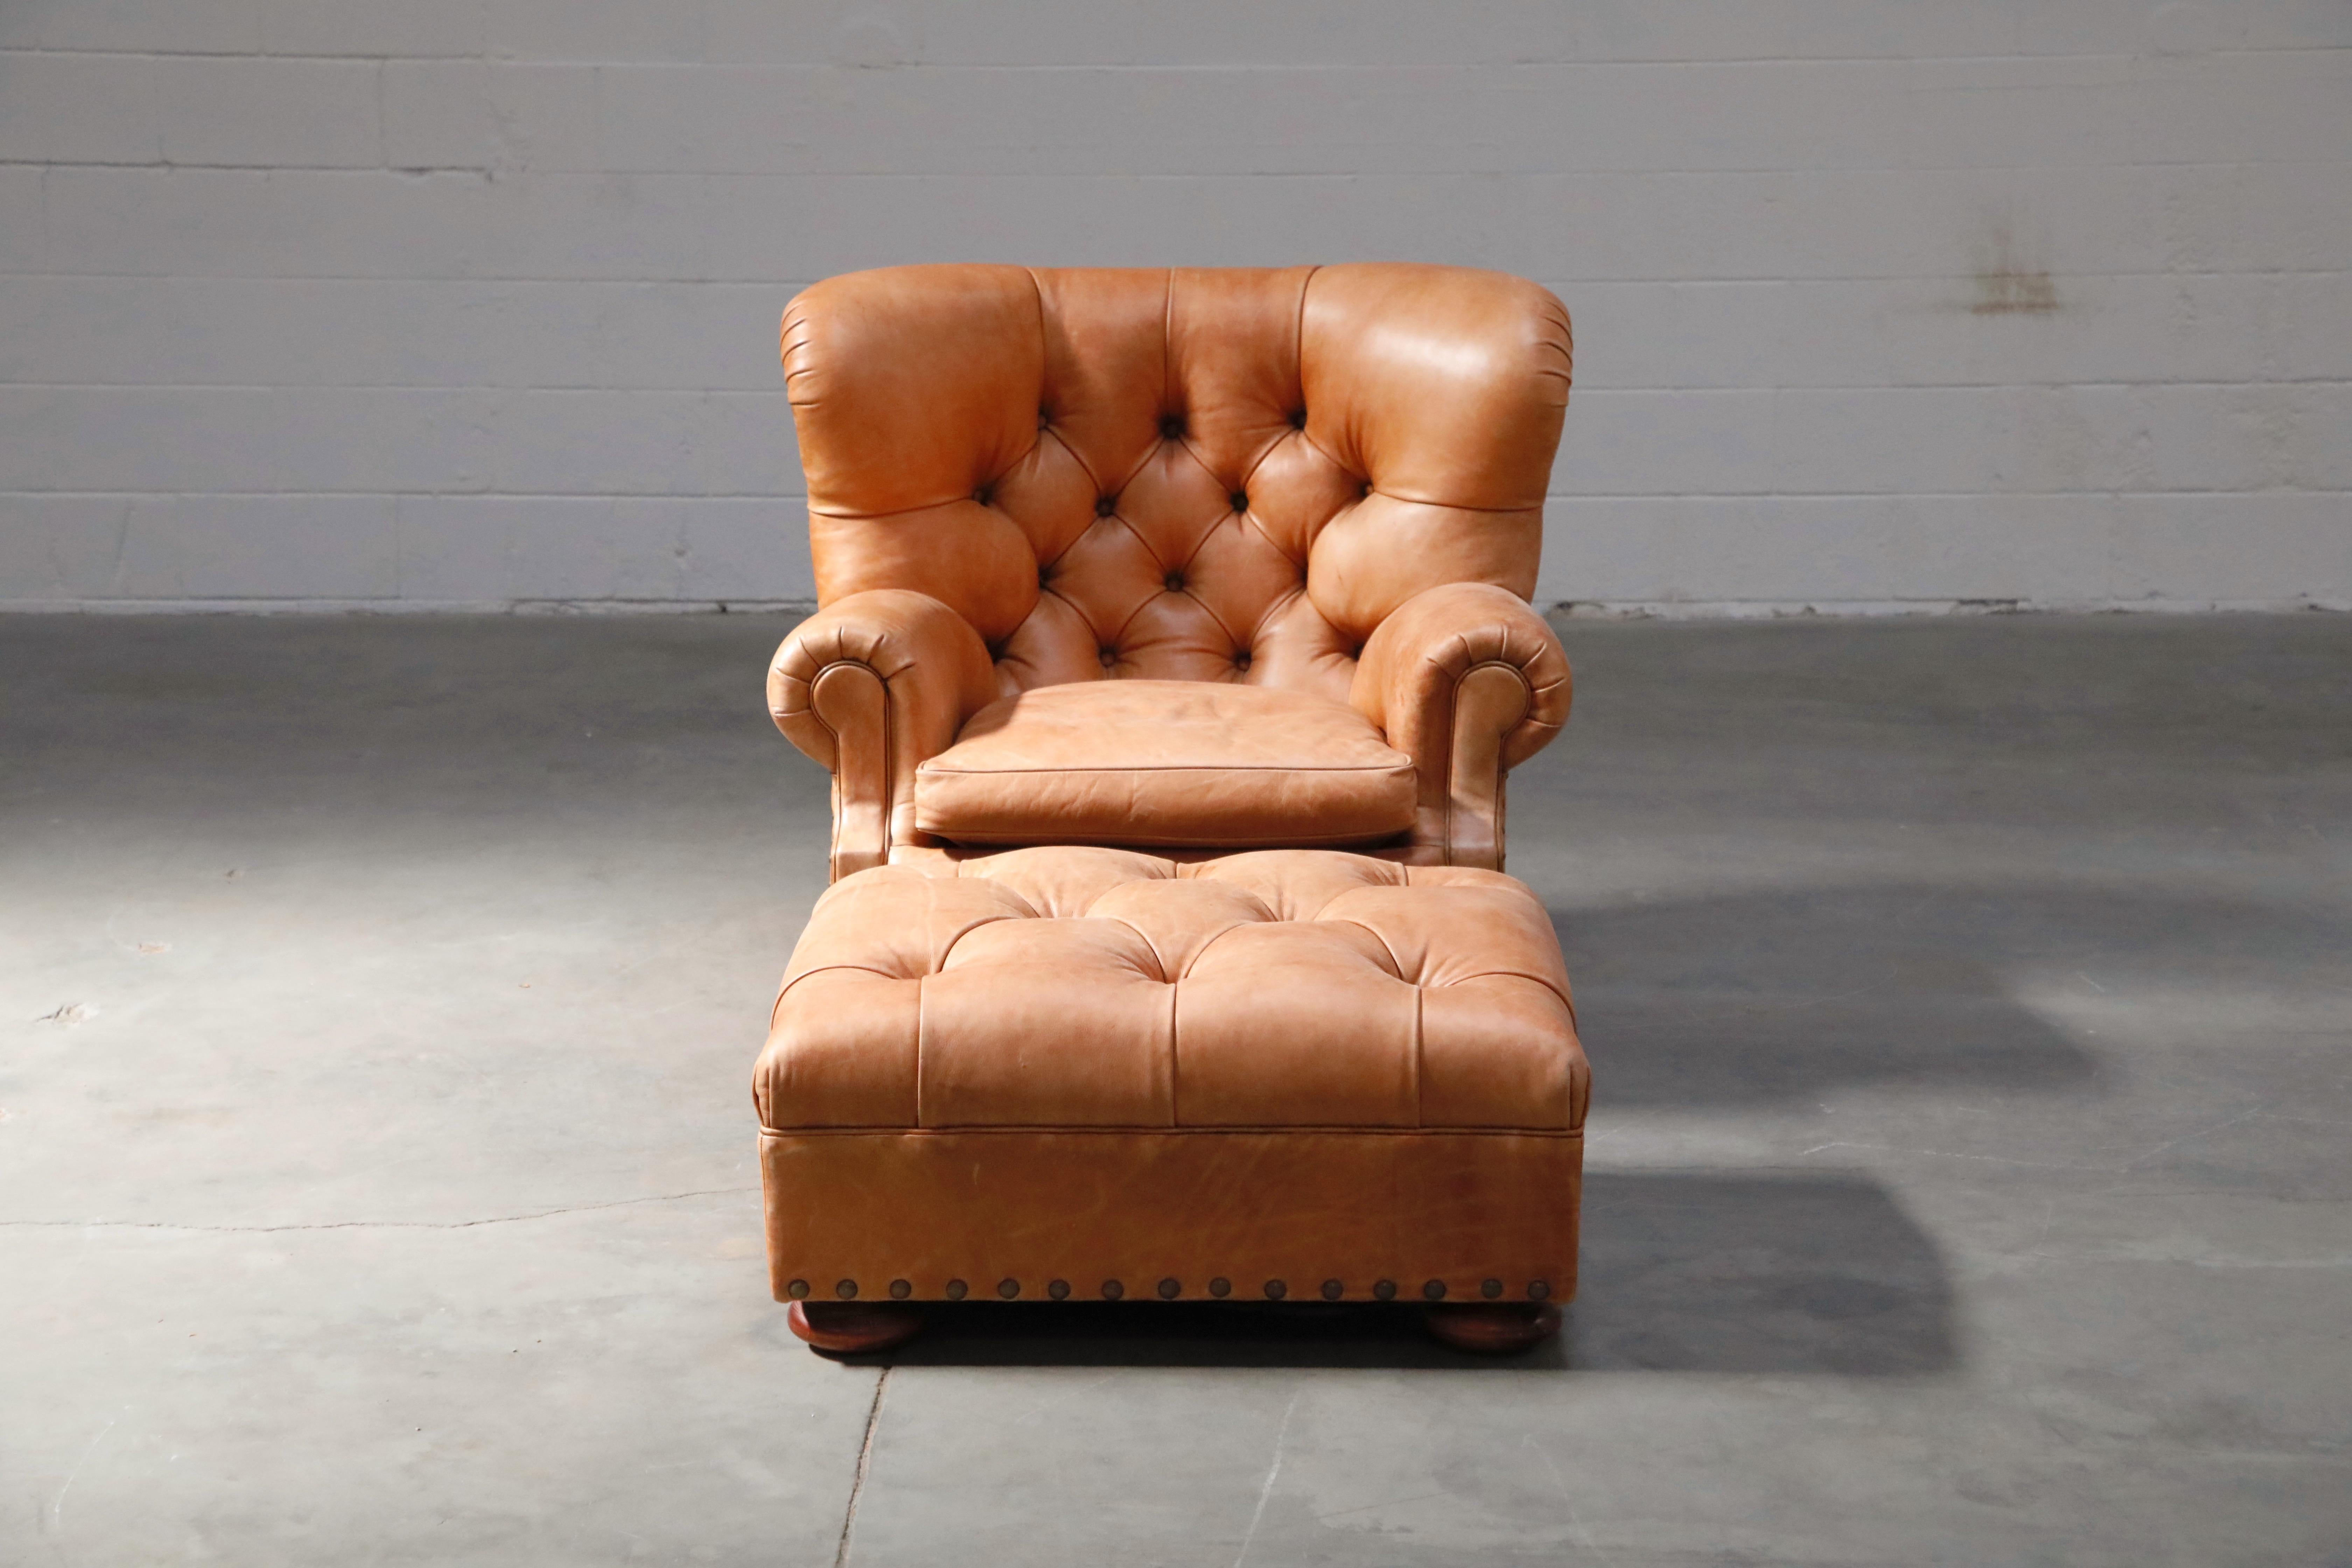 This Ralph Lauren labelled writer's club chair and ottoman has such incredible leather, very thick and quality natural hides were used in it's making. The striking large scale wingback silhouette is iconic, along with the many deeply tufted buttons,